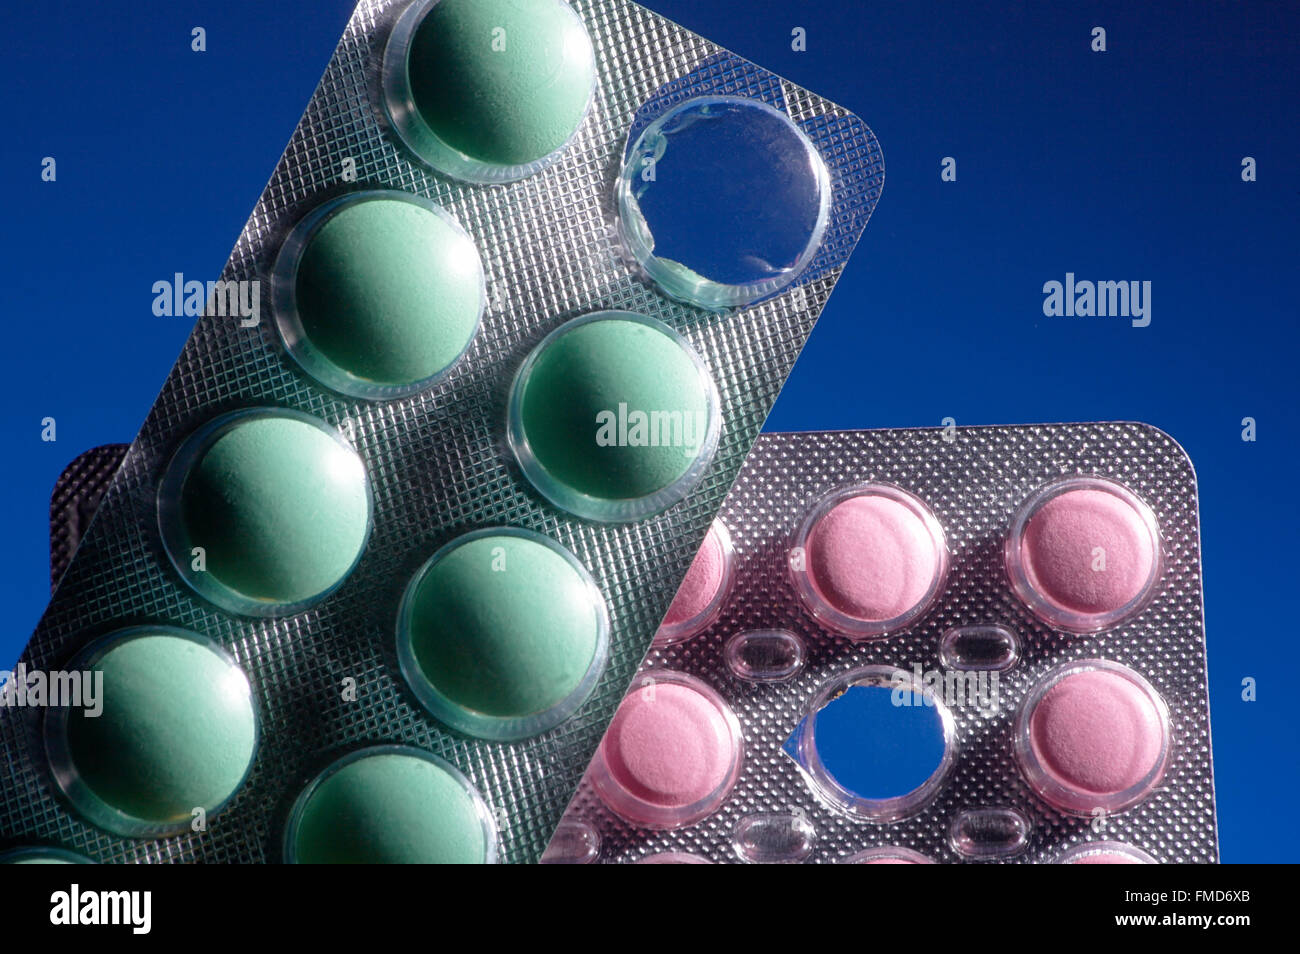 Pink and green tablets on a dark blue background Stock Photo